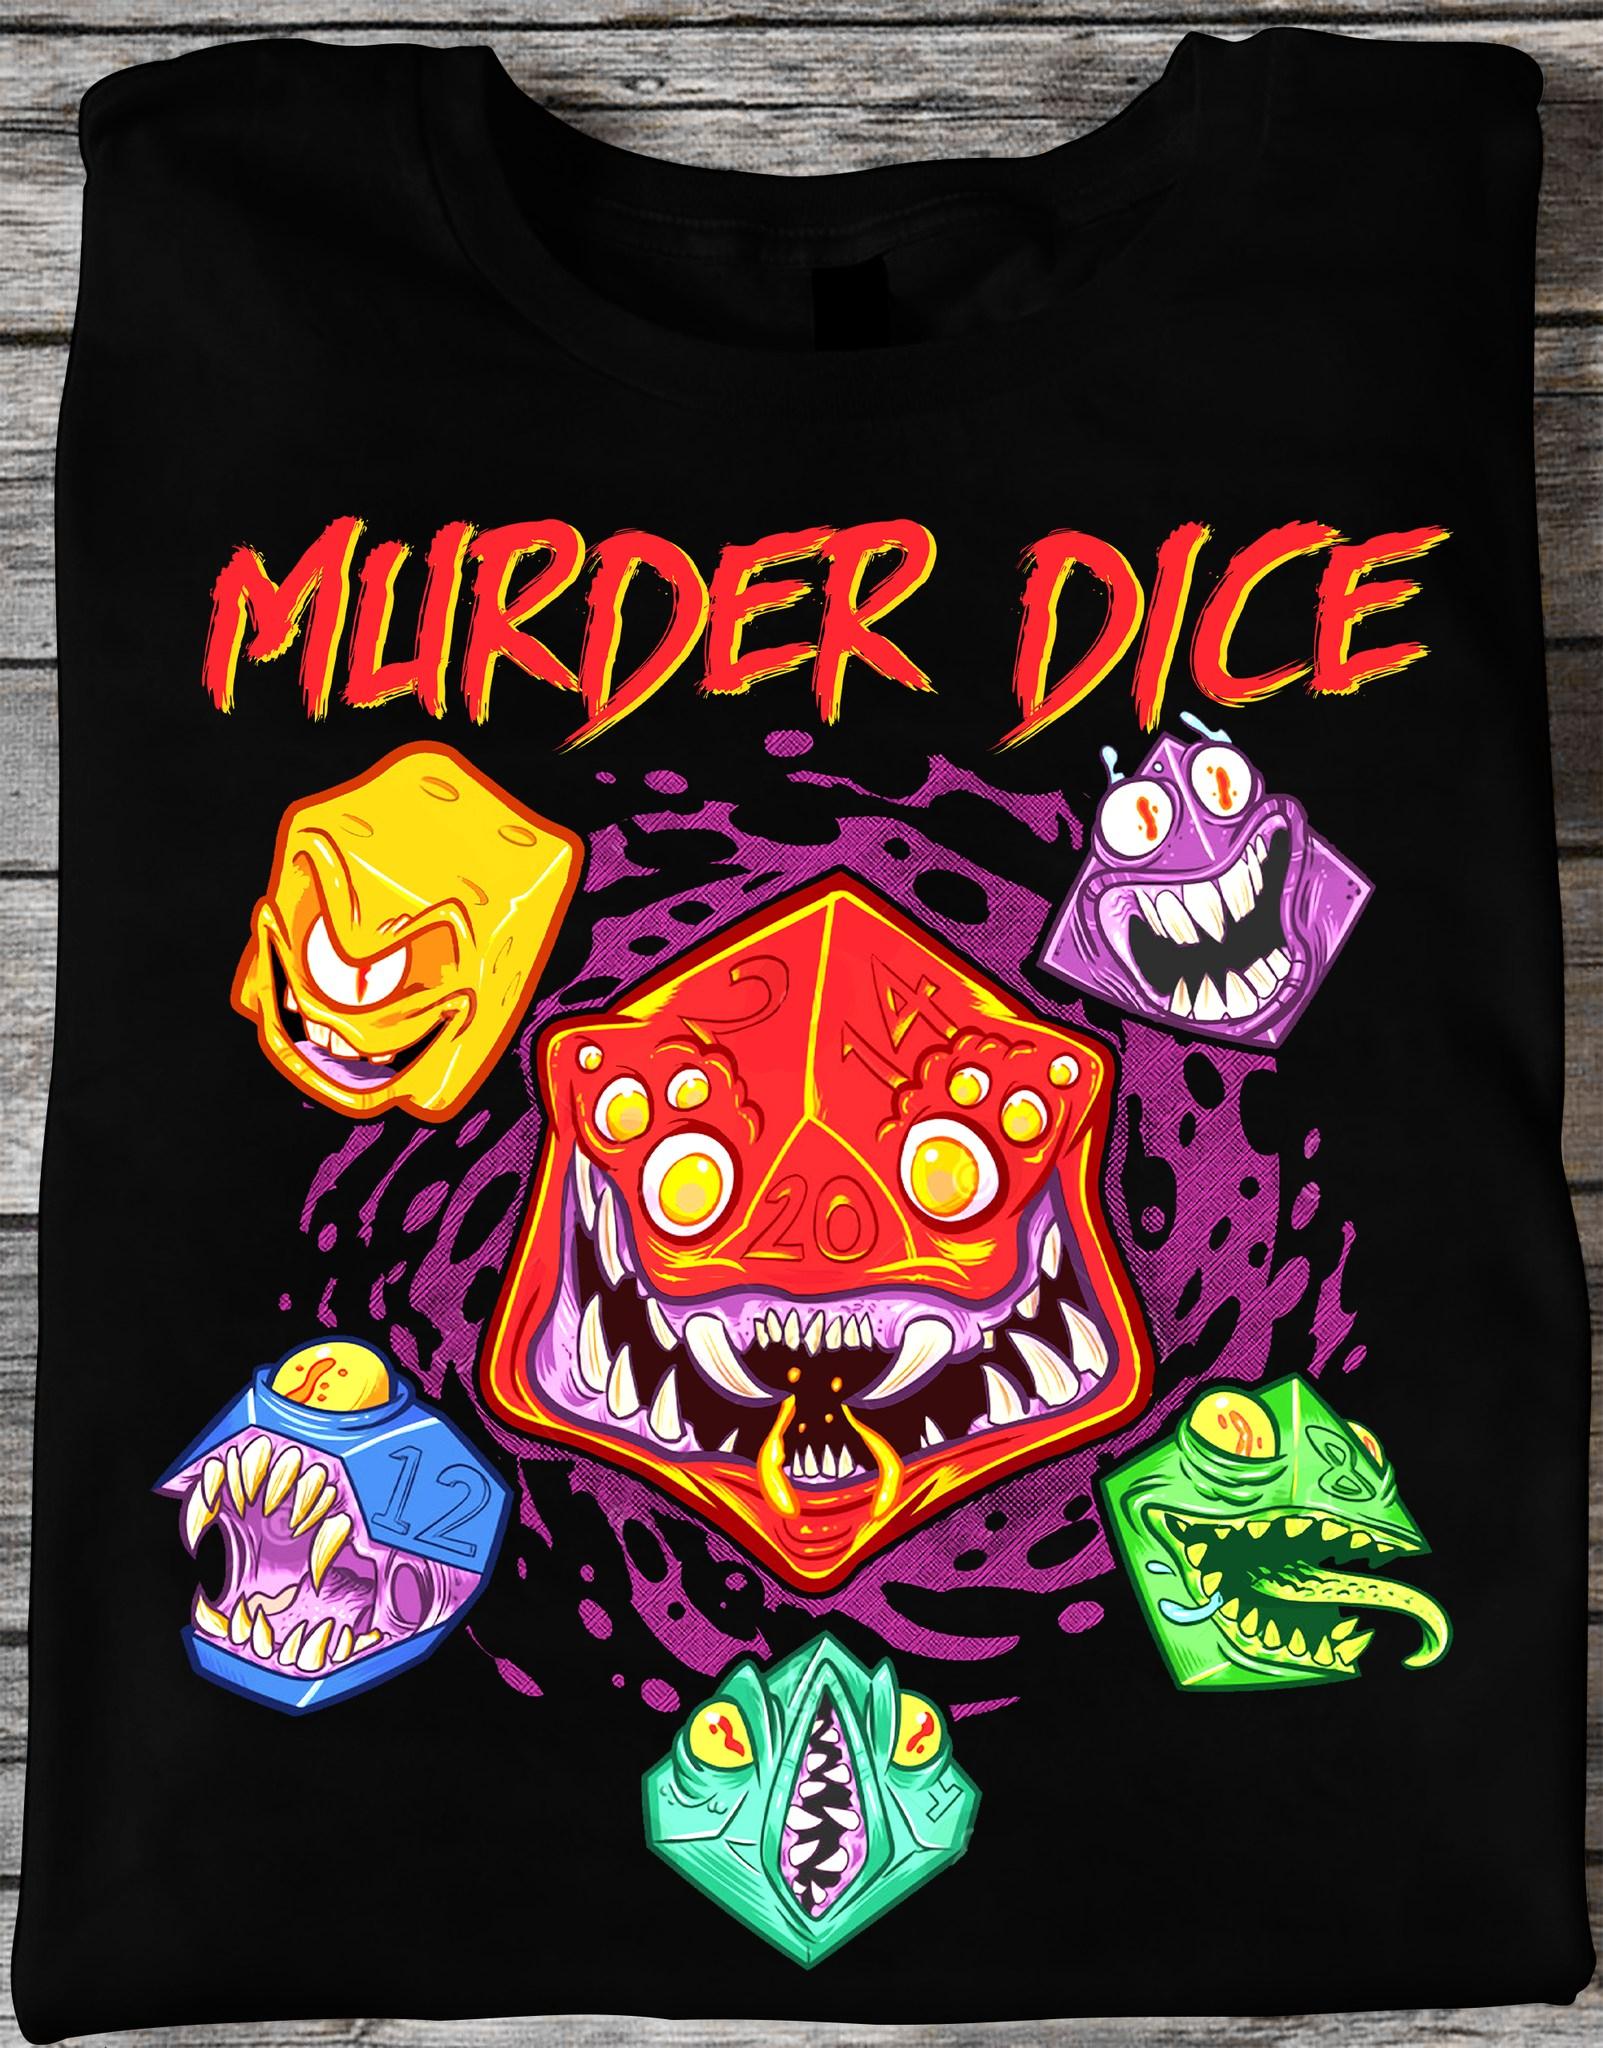 Murder dice - Monster dice, Dungeons and Dragons